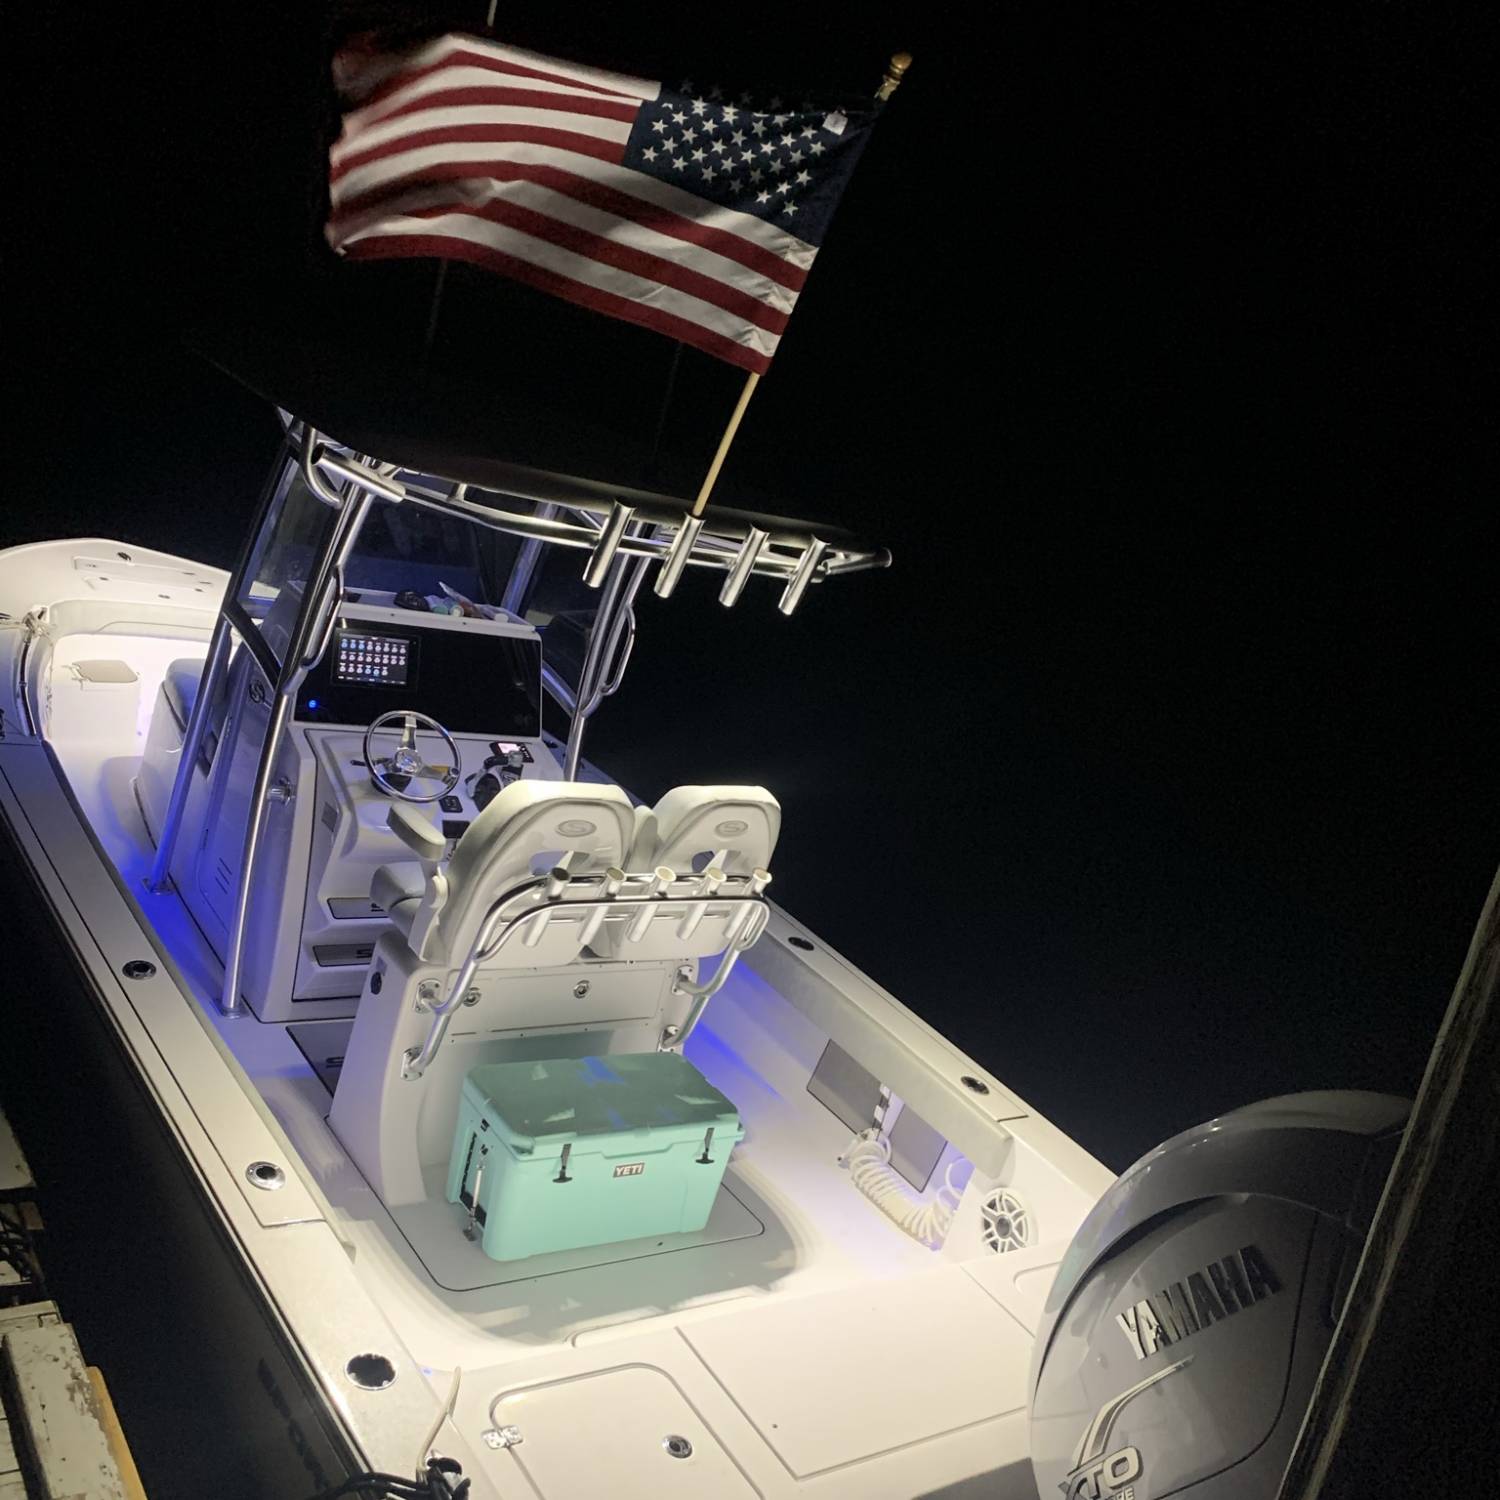 Title: Dock party! - On board their Sportsman Masters 267OE Bay Boat - Location: Palm Beach. Participating in the Photo Contest #SportsmanSeptember2021